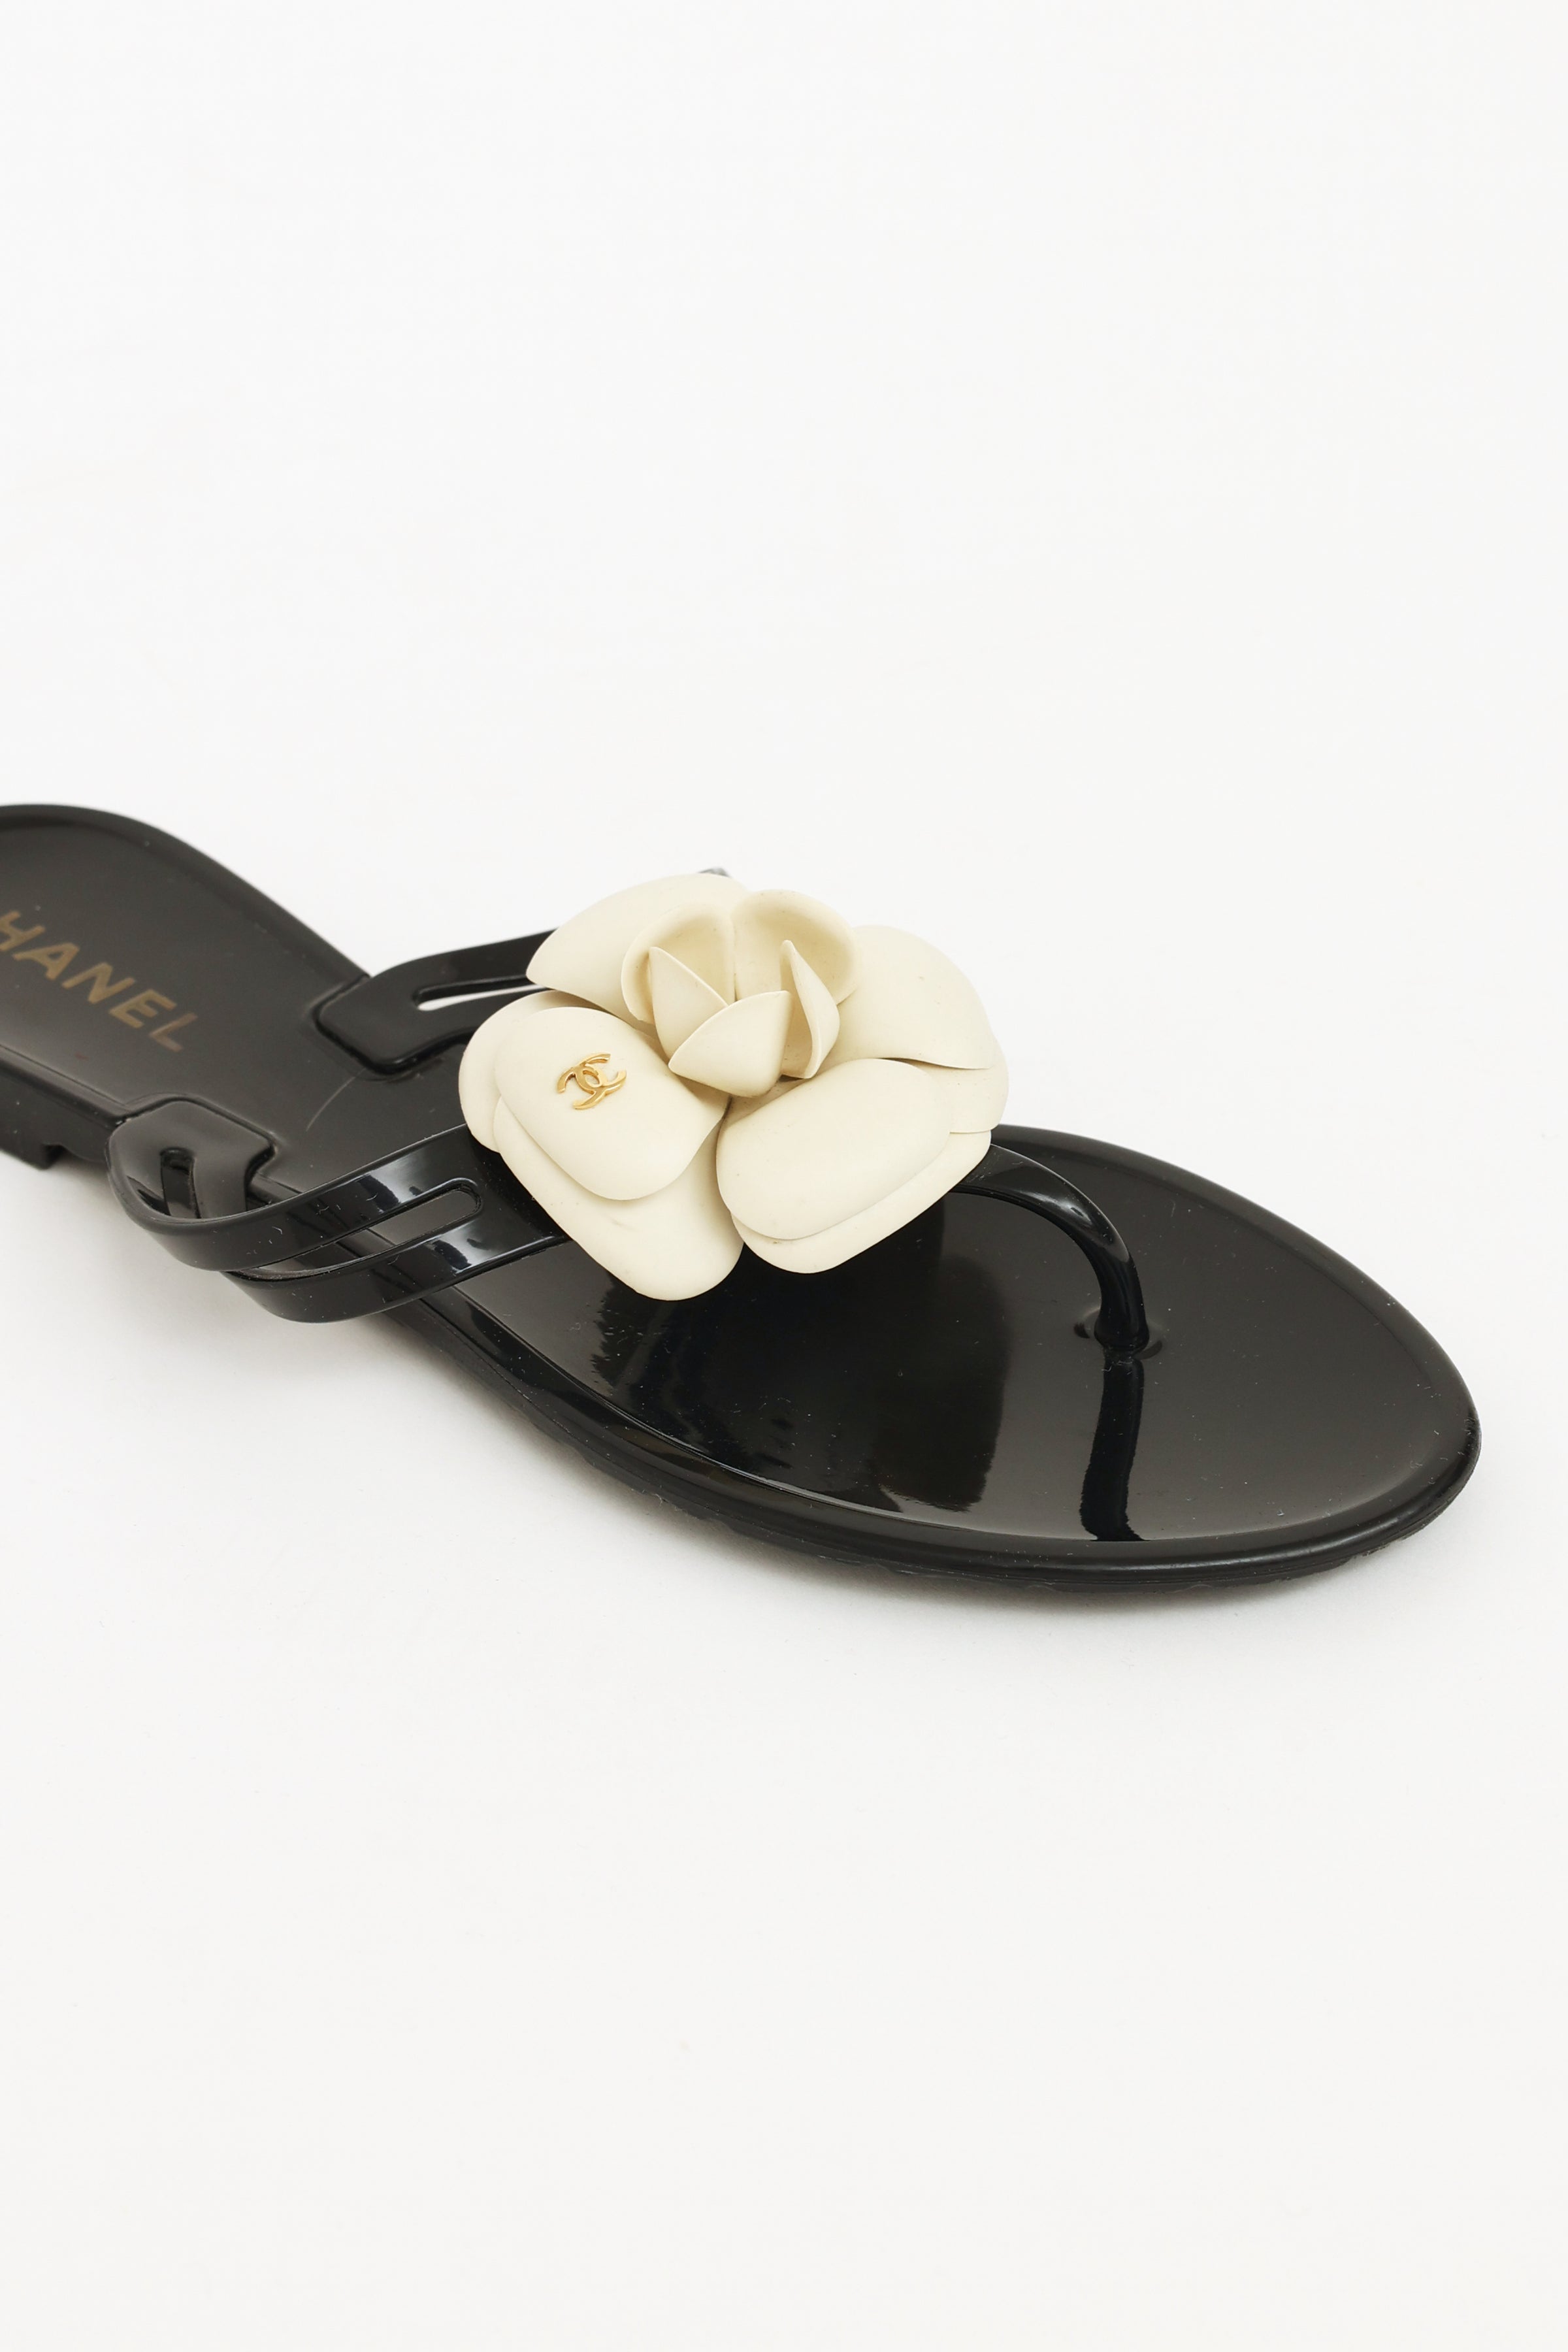 Chanel Camellia Jelly Sandals - Black Sandals, Shoes - CHA211944